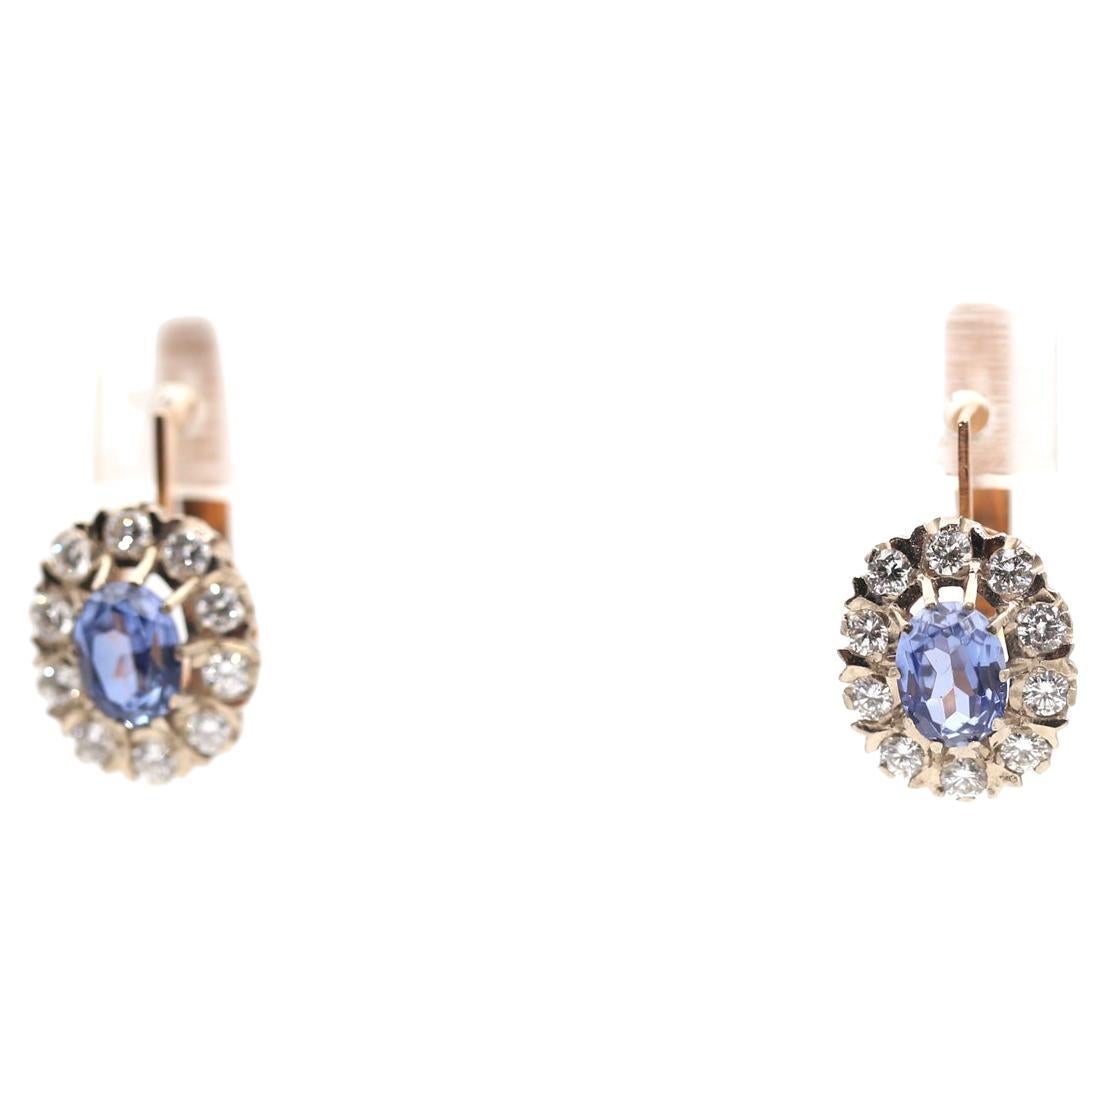 2.6 Ct Diamonds Sapphires Gold Earring 14K, 1960
Gold earrings inlaid with about 2.60 Carats of white Diamonds and Sapphires with delicate blue-violet colors. 
The earrings are stamped and signed 585 (14 Karat) Soviet Russian stamps. The height of